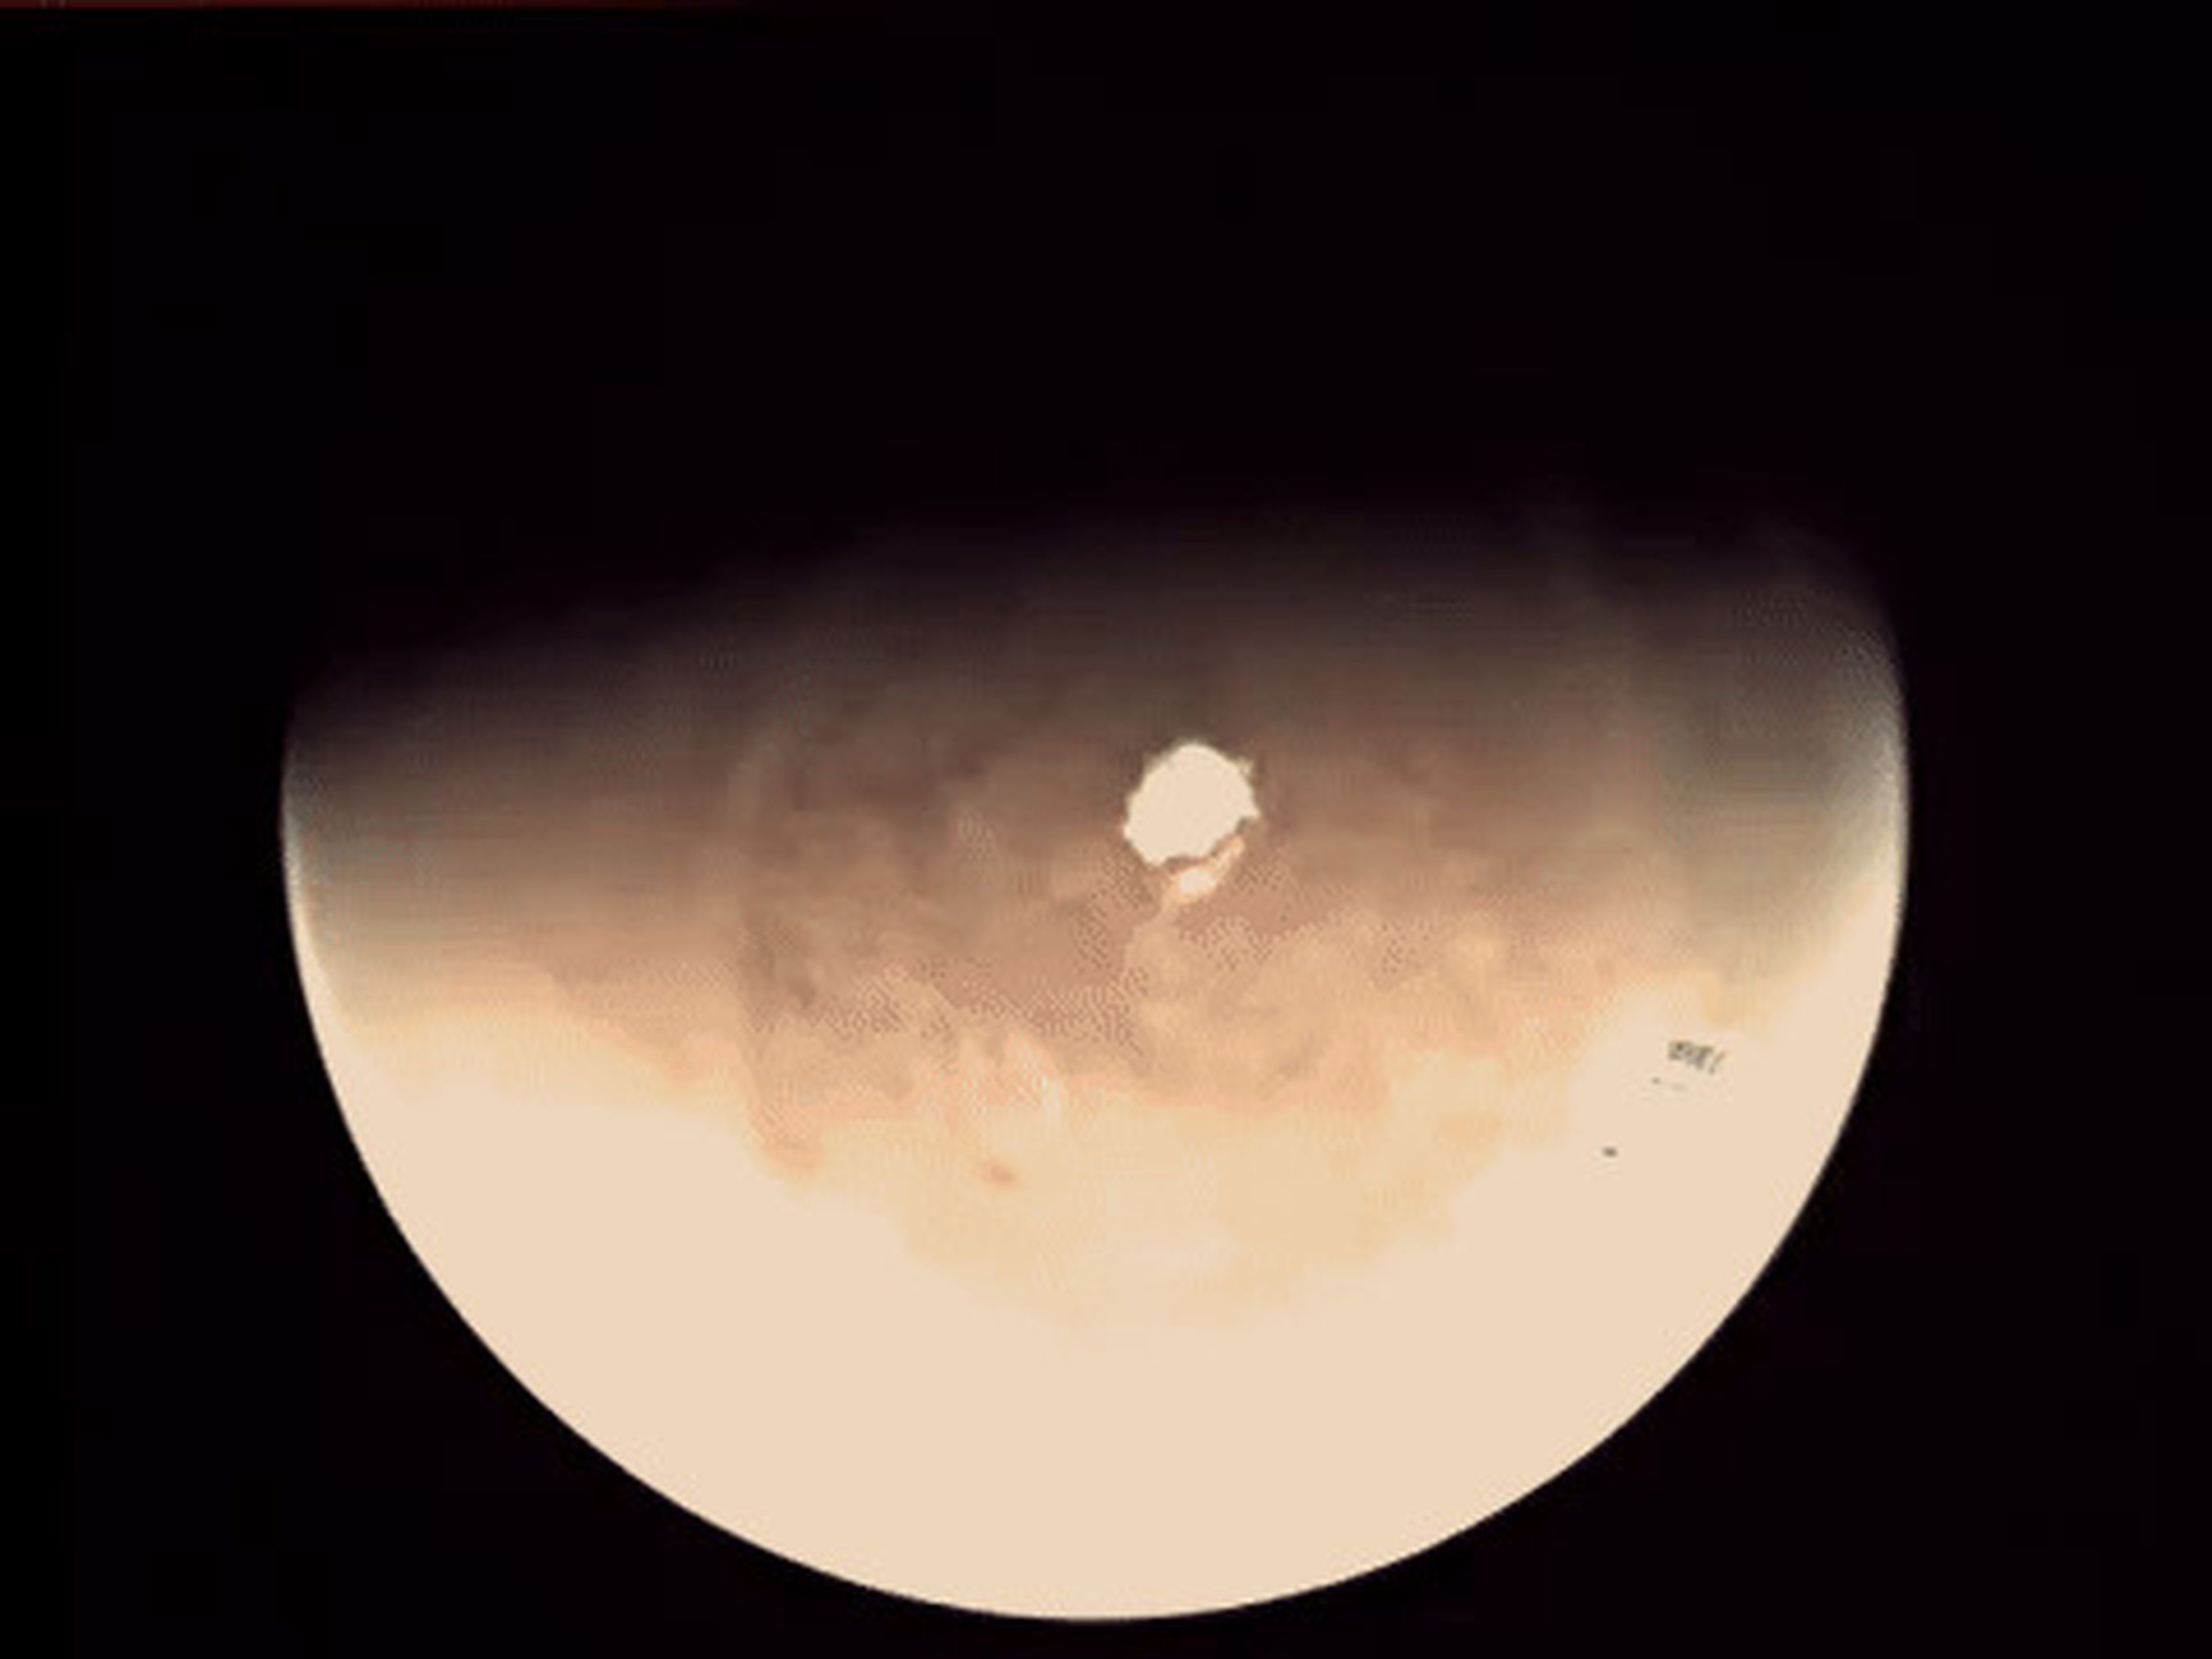 A composite of Mars Express images shows the satellite approaching Mars. Half of the planet is shaded